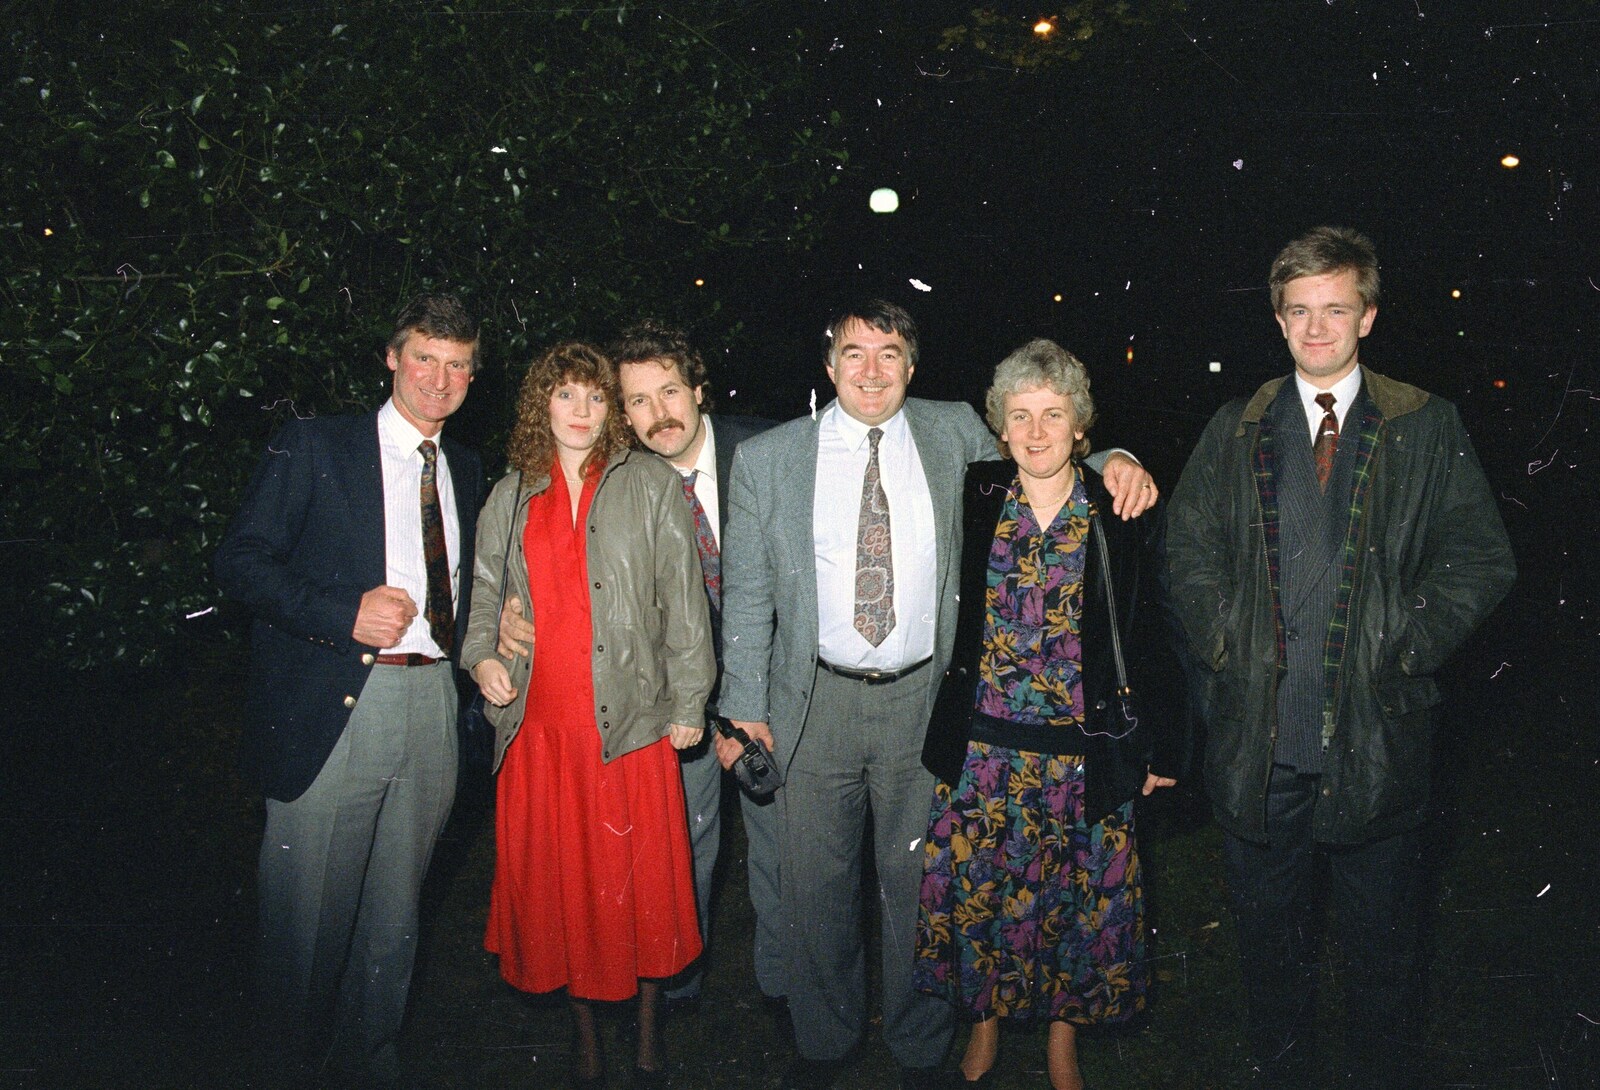 Geoff, Monique, Keith, David, Linda and Nosher from Clays Does Bruges, Belgium - 19th December 1992